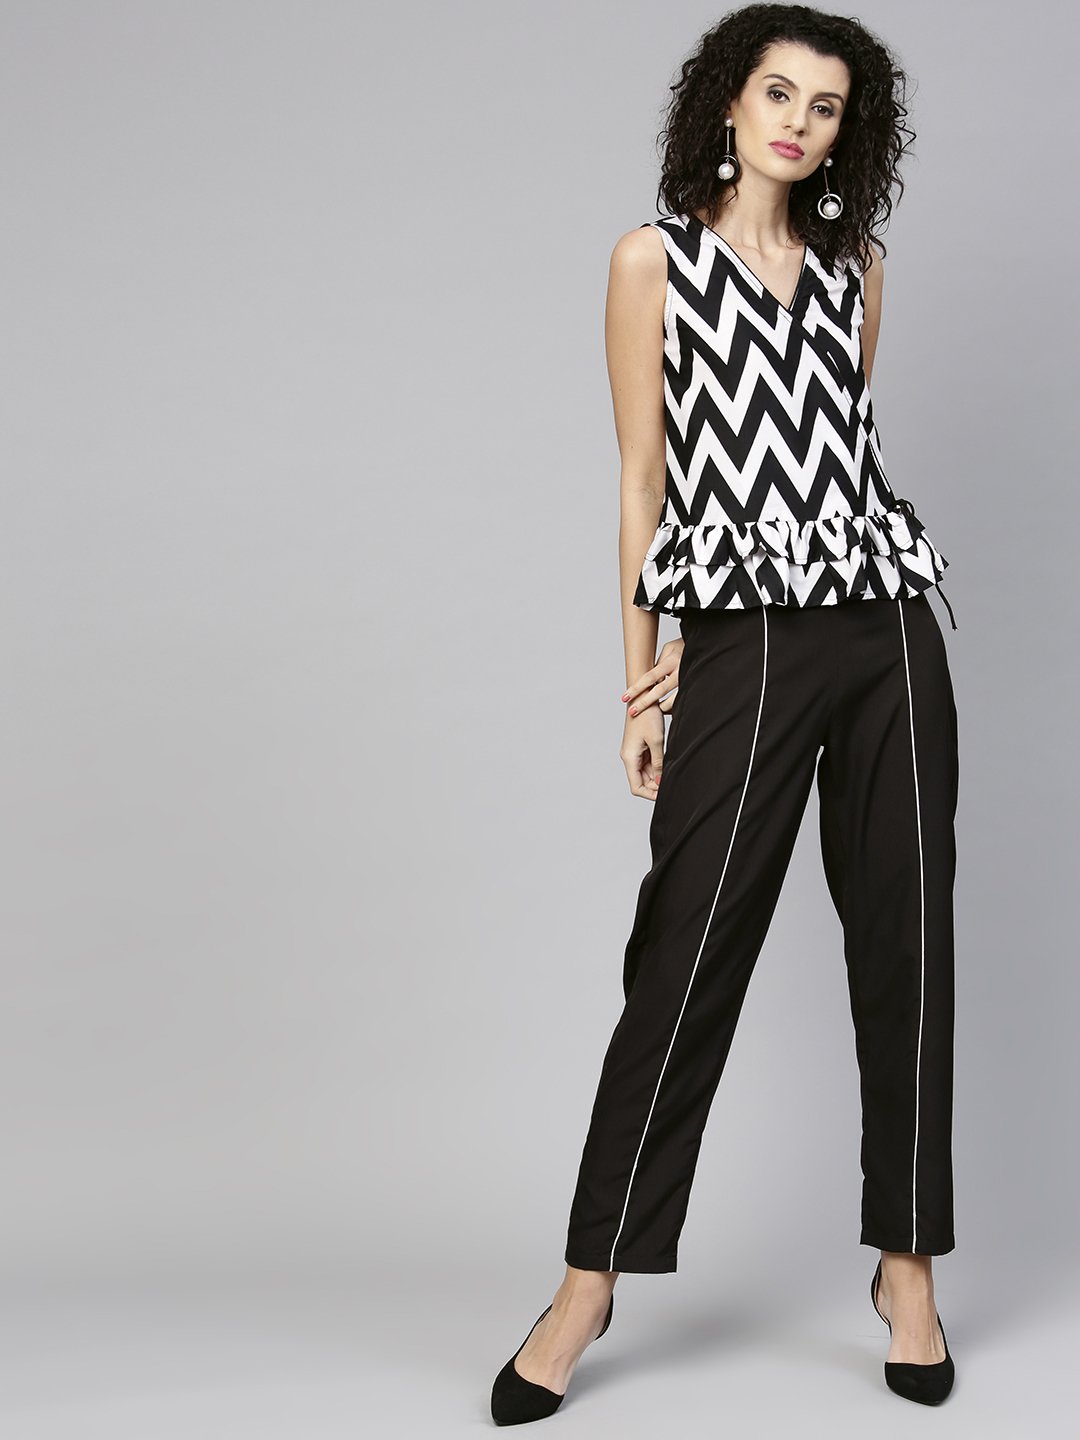 Women's Black & White Printed Top With Trouser - Nayo Clothing